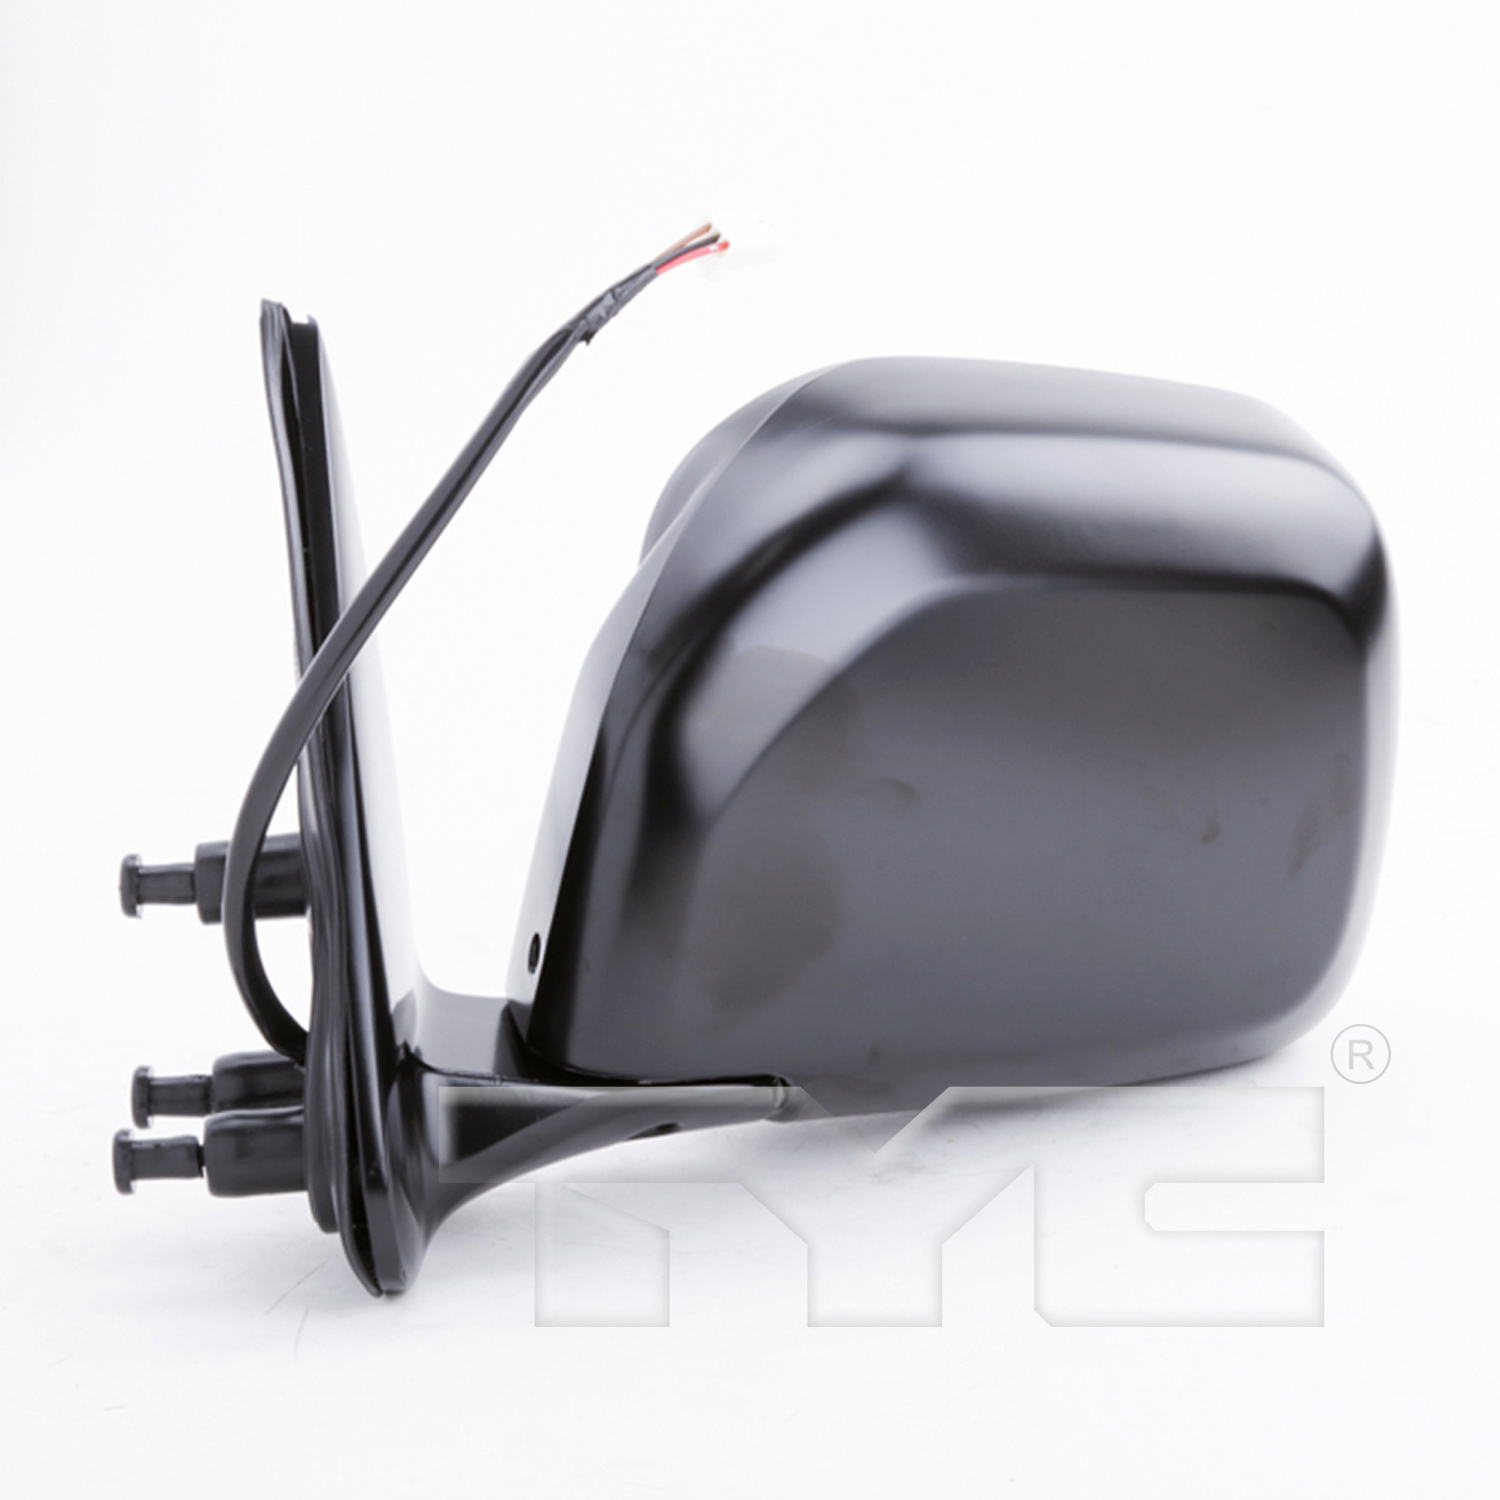 Aftermarket MIRRORS for TOYOTA - TACOMA, TACOMA,01-04,LT Mirror outside rear view